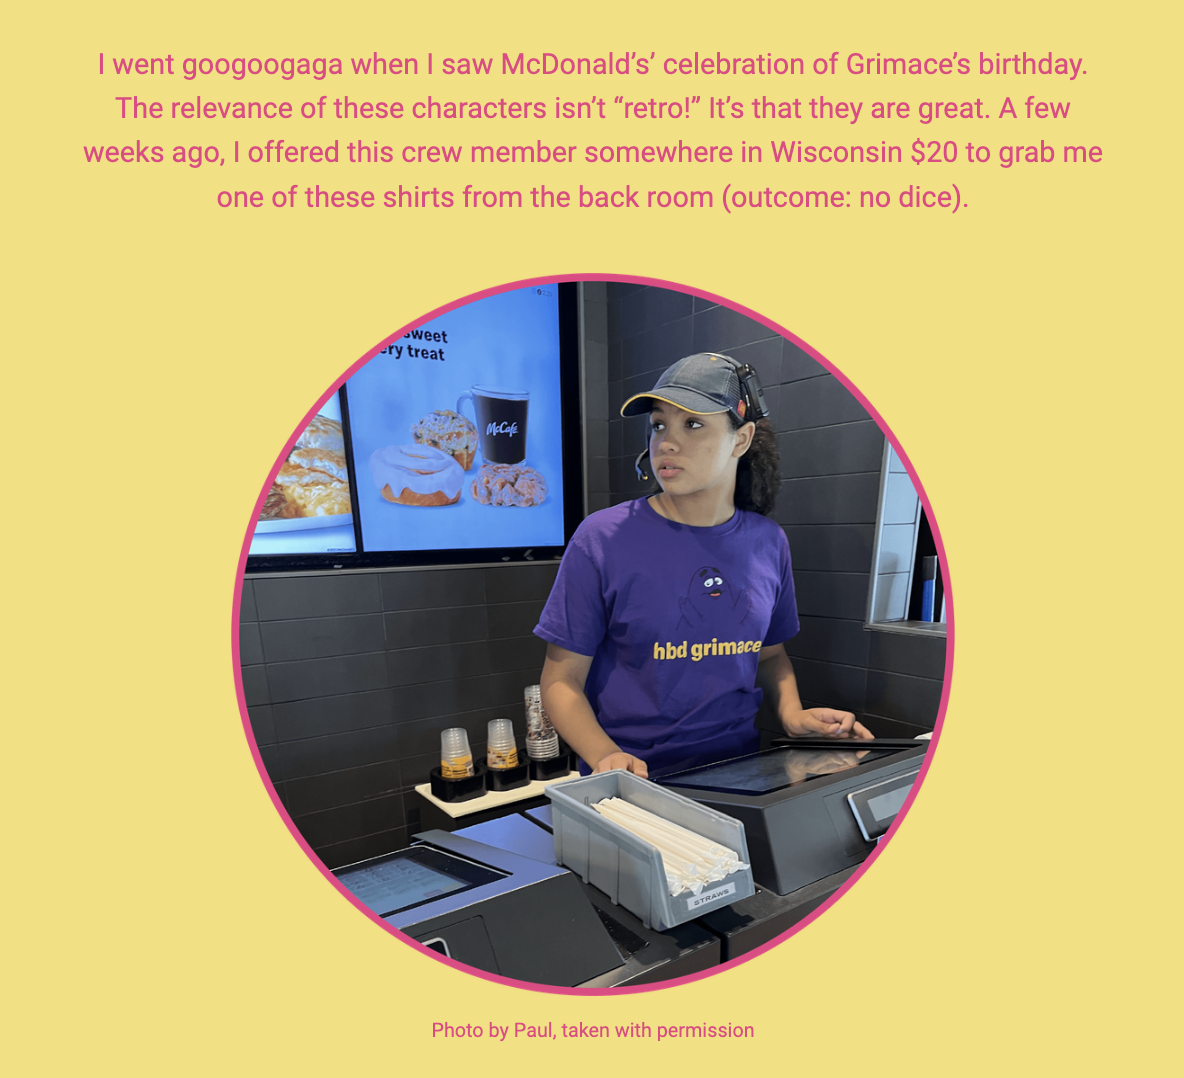 The image is a candid photo of a McDonald's crew member at the counter, wearing a purple t-shirt with the text "hbd grimace," suggesting a celebration of the character Grimace's birthday. In the background, there's a digital menu display showing food items. The surrounding text conveys the photographer's excitement about McDonald's nostalgia, particularly the characters which the author doesn't regard as merely "retro" but genuinely great. The author humorously shares a personal anecdote of attempting to purchase one of the t-shirts from the crew member for $20 in Wisconsin, to no avail.

The text within the image reads:
"I went googoo gaga when I saw McDonald’s celebration of Grimace’s birthday. The relevance of these characters isn’t “retro!” It’s that they are great. A few weeks ago, I offered this crew member somewhere in Wisconsin $20 to grab me one of these shirts from the back room (outcome: no dice).

Photo by Paul, taken with permission"